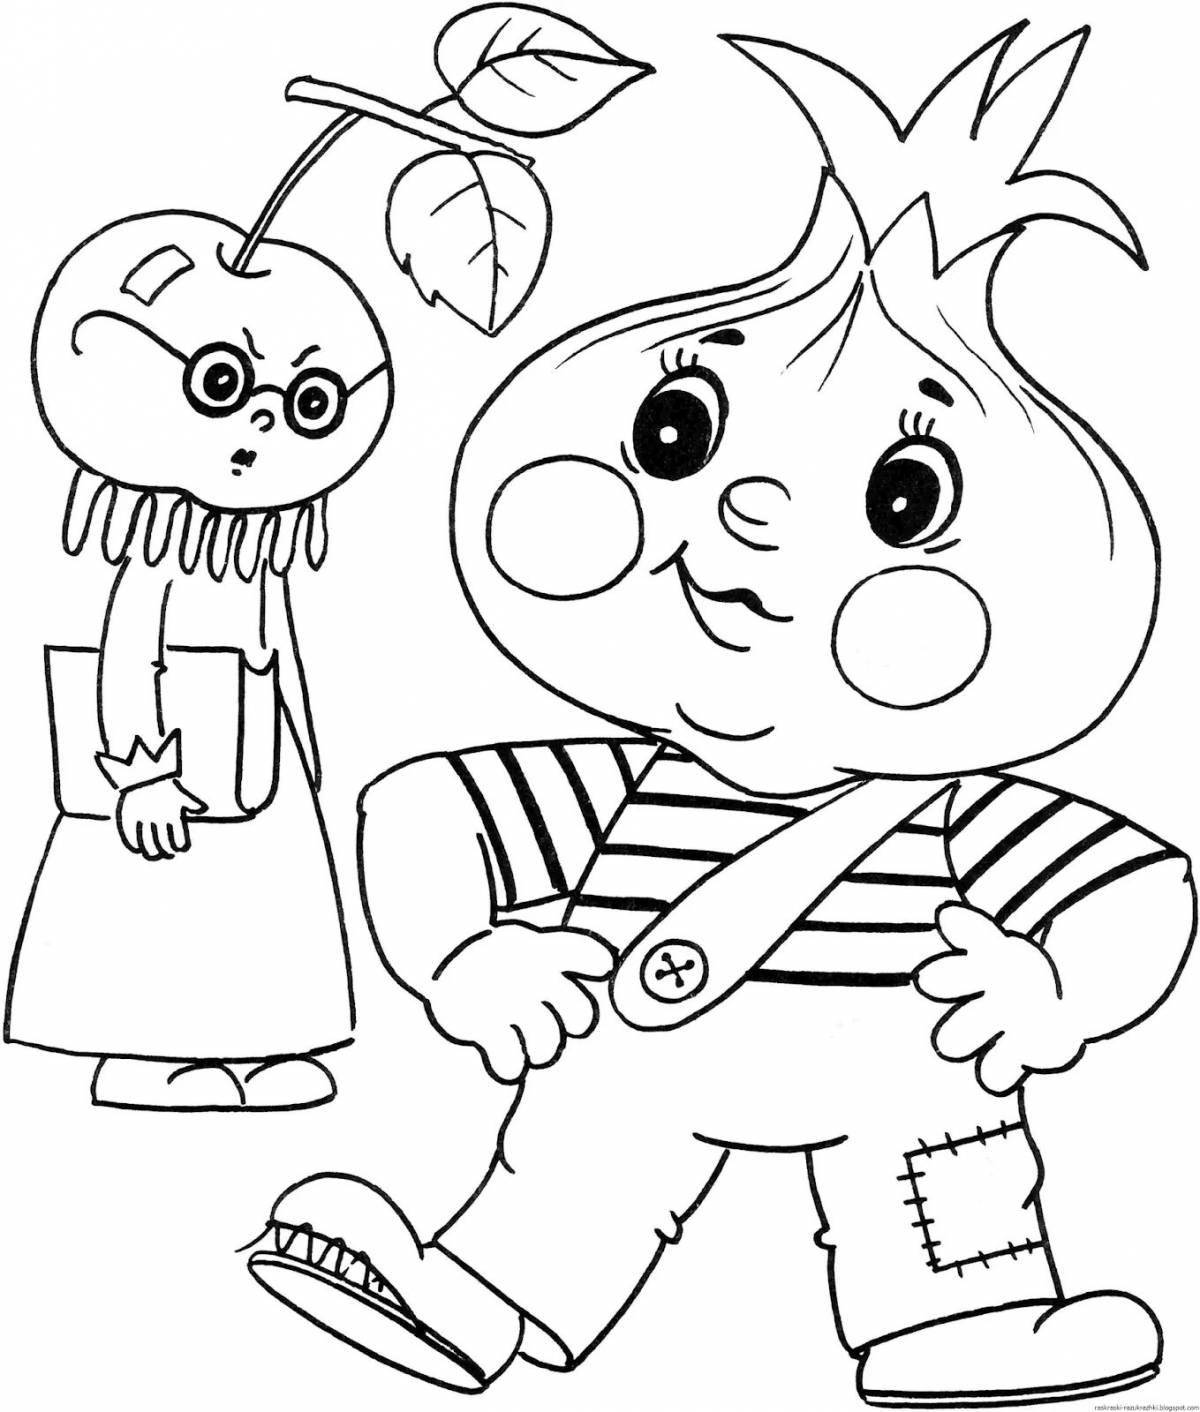 Amazing cartoon characters coloring book for 4-5 year olds